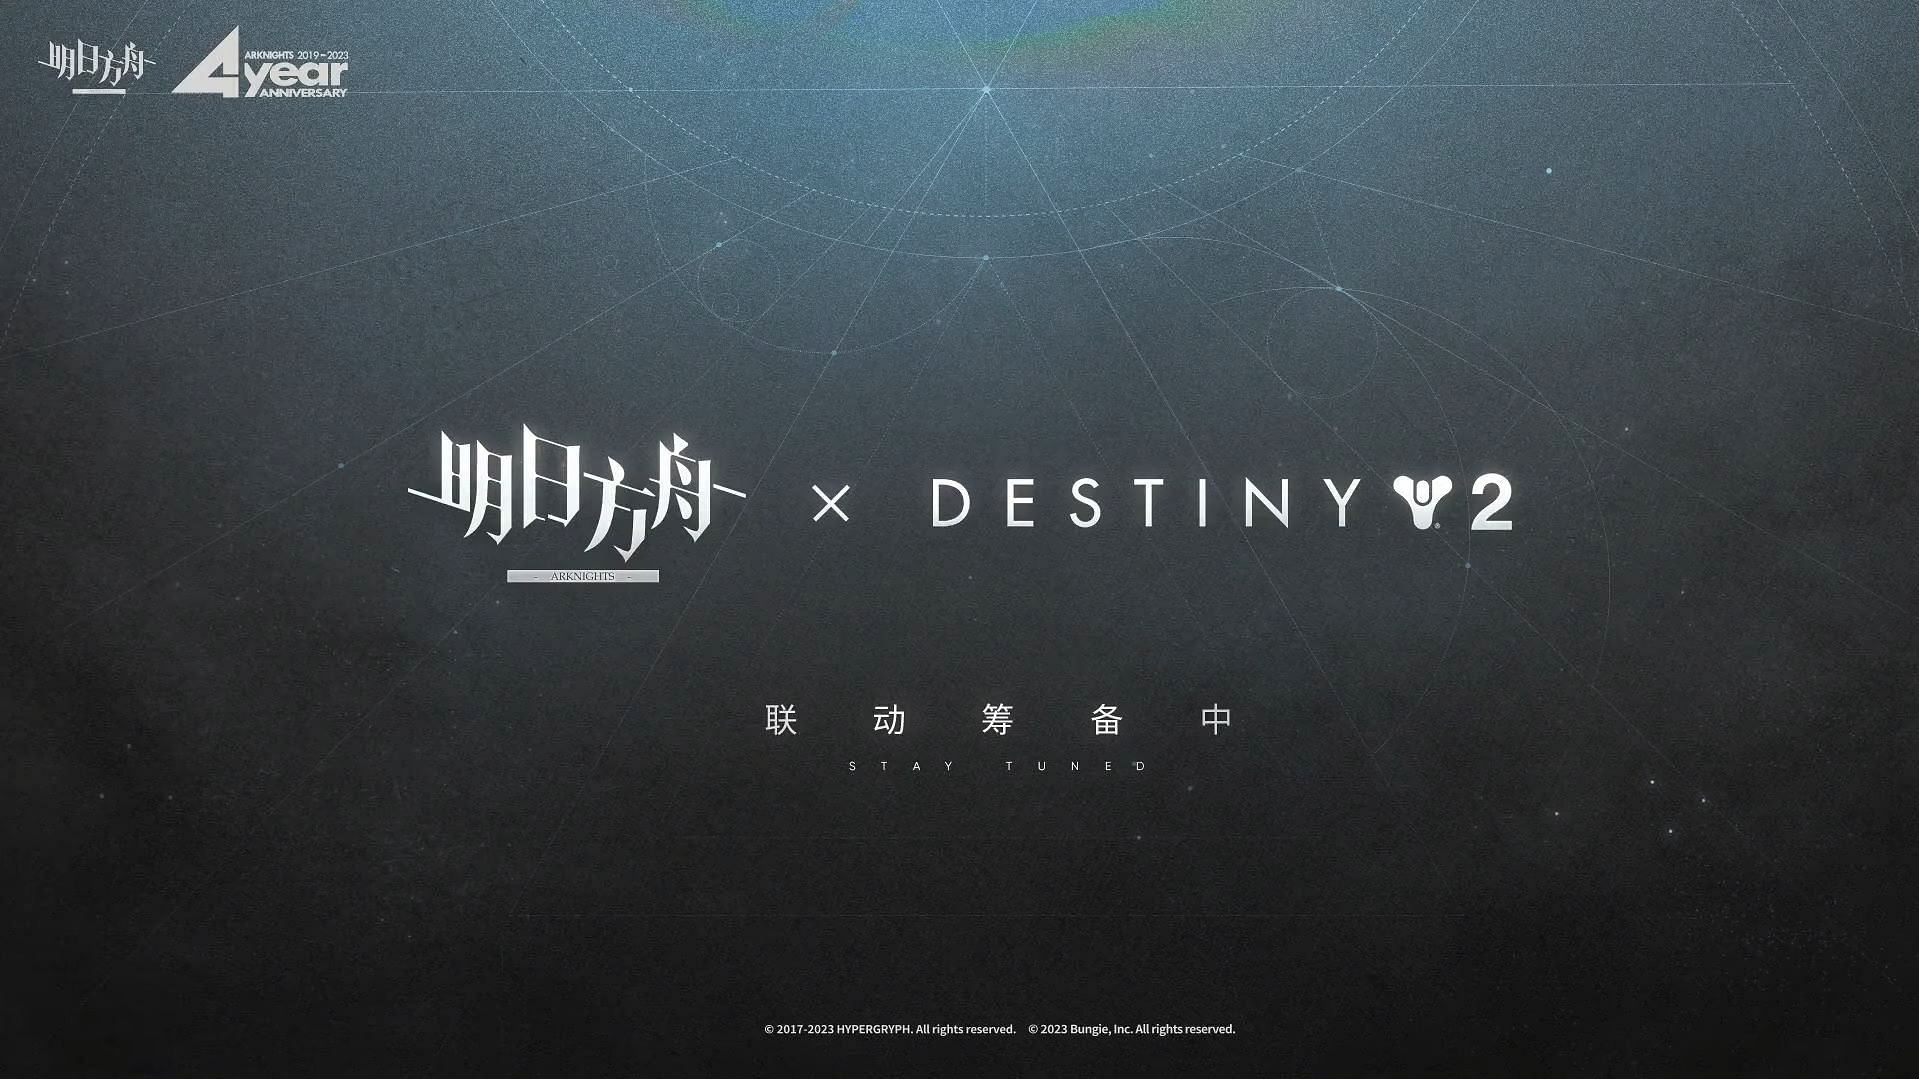 Arknights x Destiny 2 collaboration official announcement (Image via Yostar)